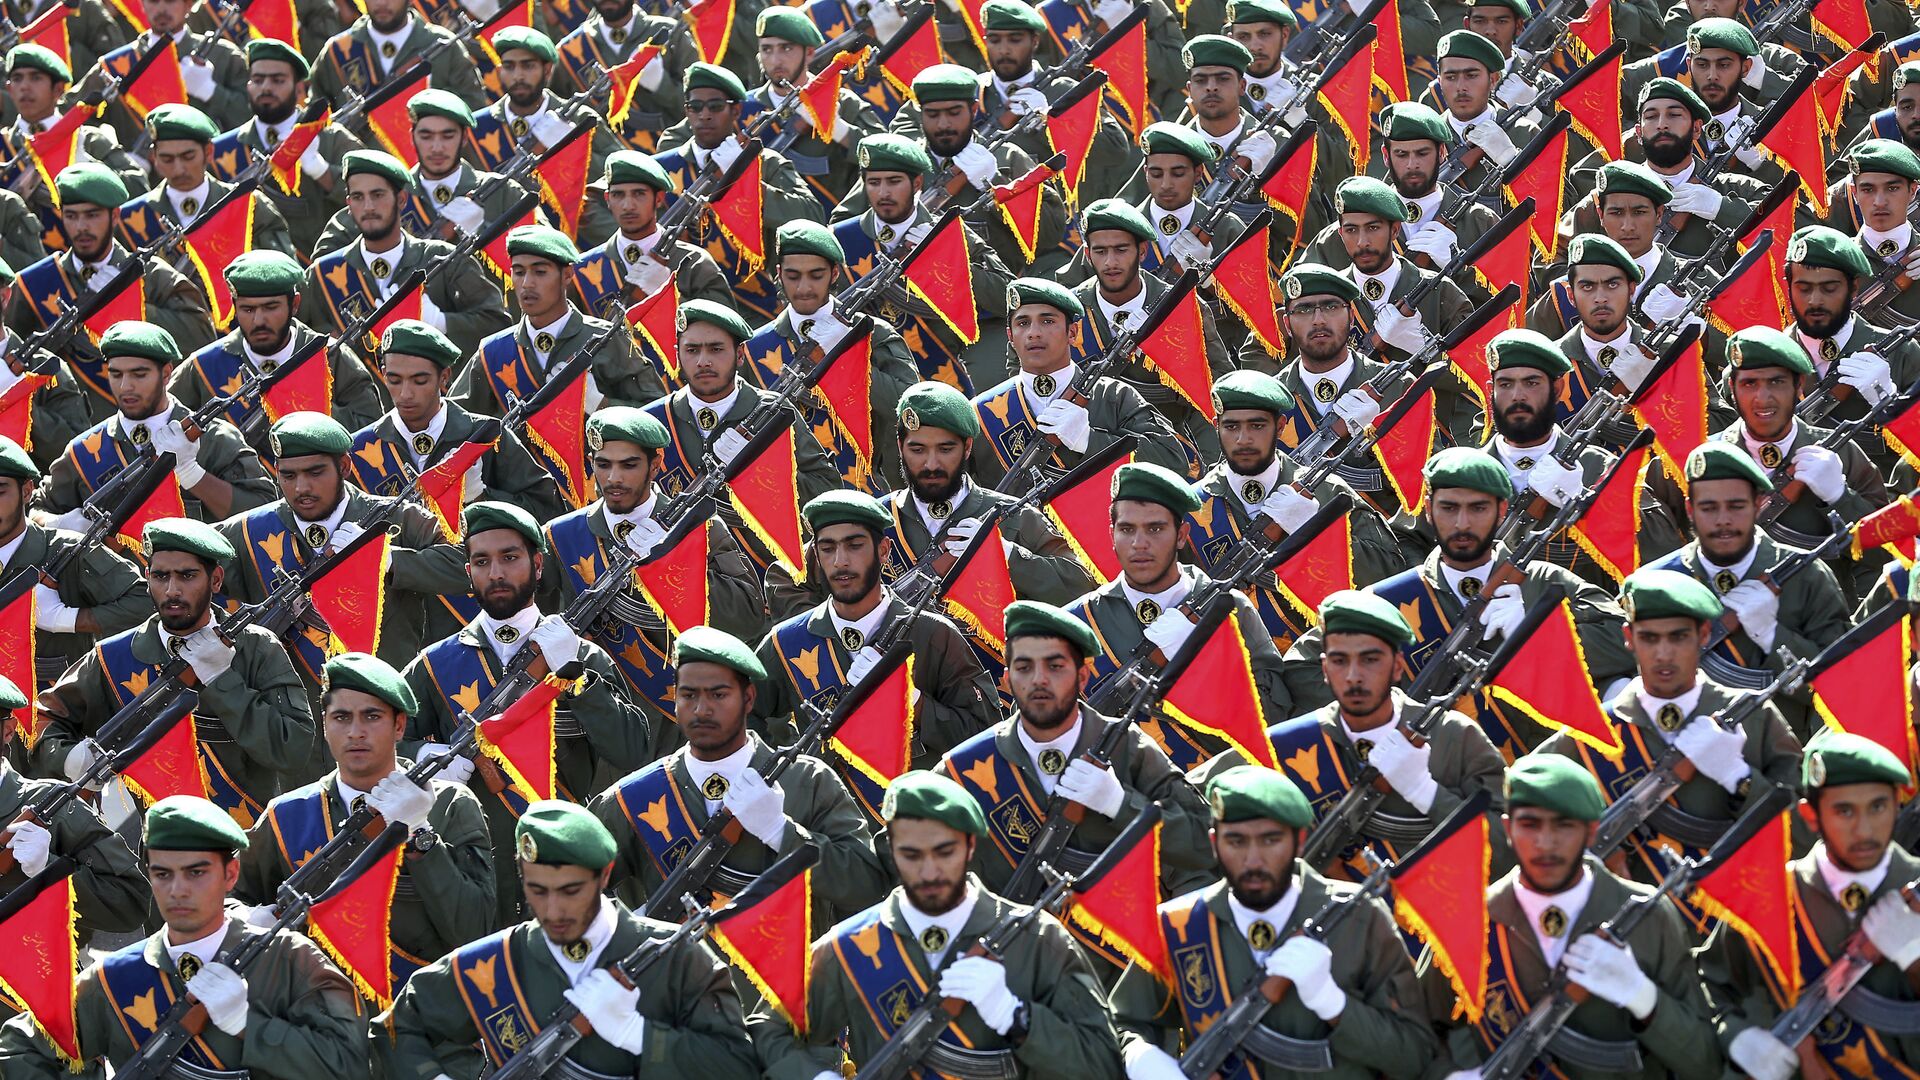 In this Sept. 21, 2016 file photo, Iran's Revolutionary Guard troops march in a military parade marking the 36th anniversary of Iraq's 1980 invasion of Iran, in front of the shrine of late revolutionary founder Ayatollah Khomeini, just outside Tehran, Iran - Sputnik International, 1920, 01.04.2022